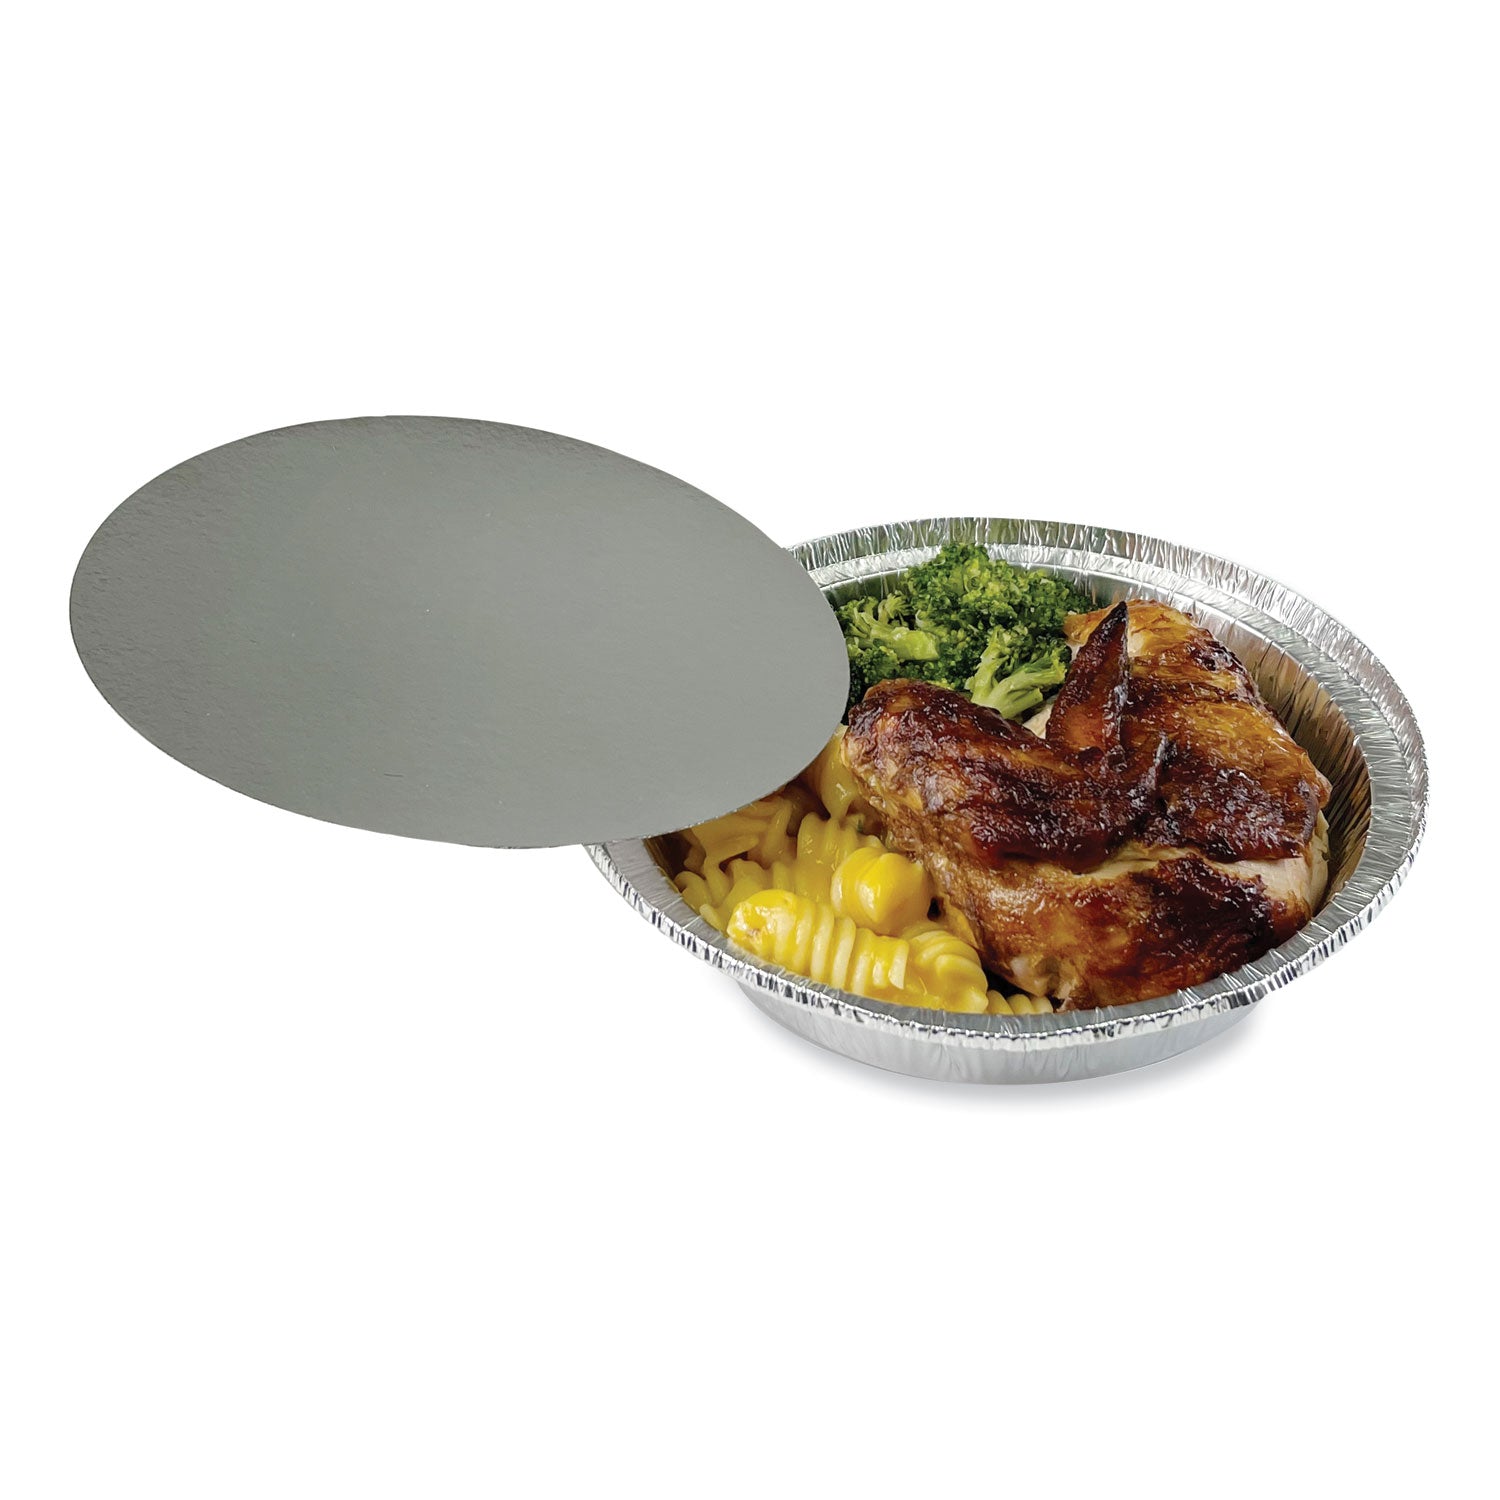 round-aluminum-to-go-containers-with-lid-24-oz-7-diameter-x-147h-silver-200-carton_bwkround7combo - 4